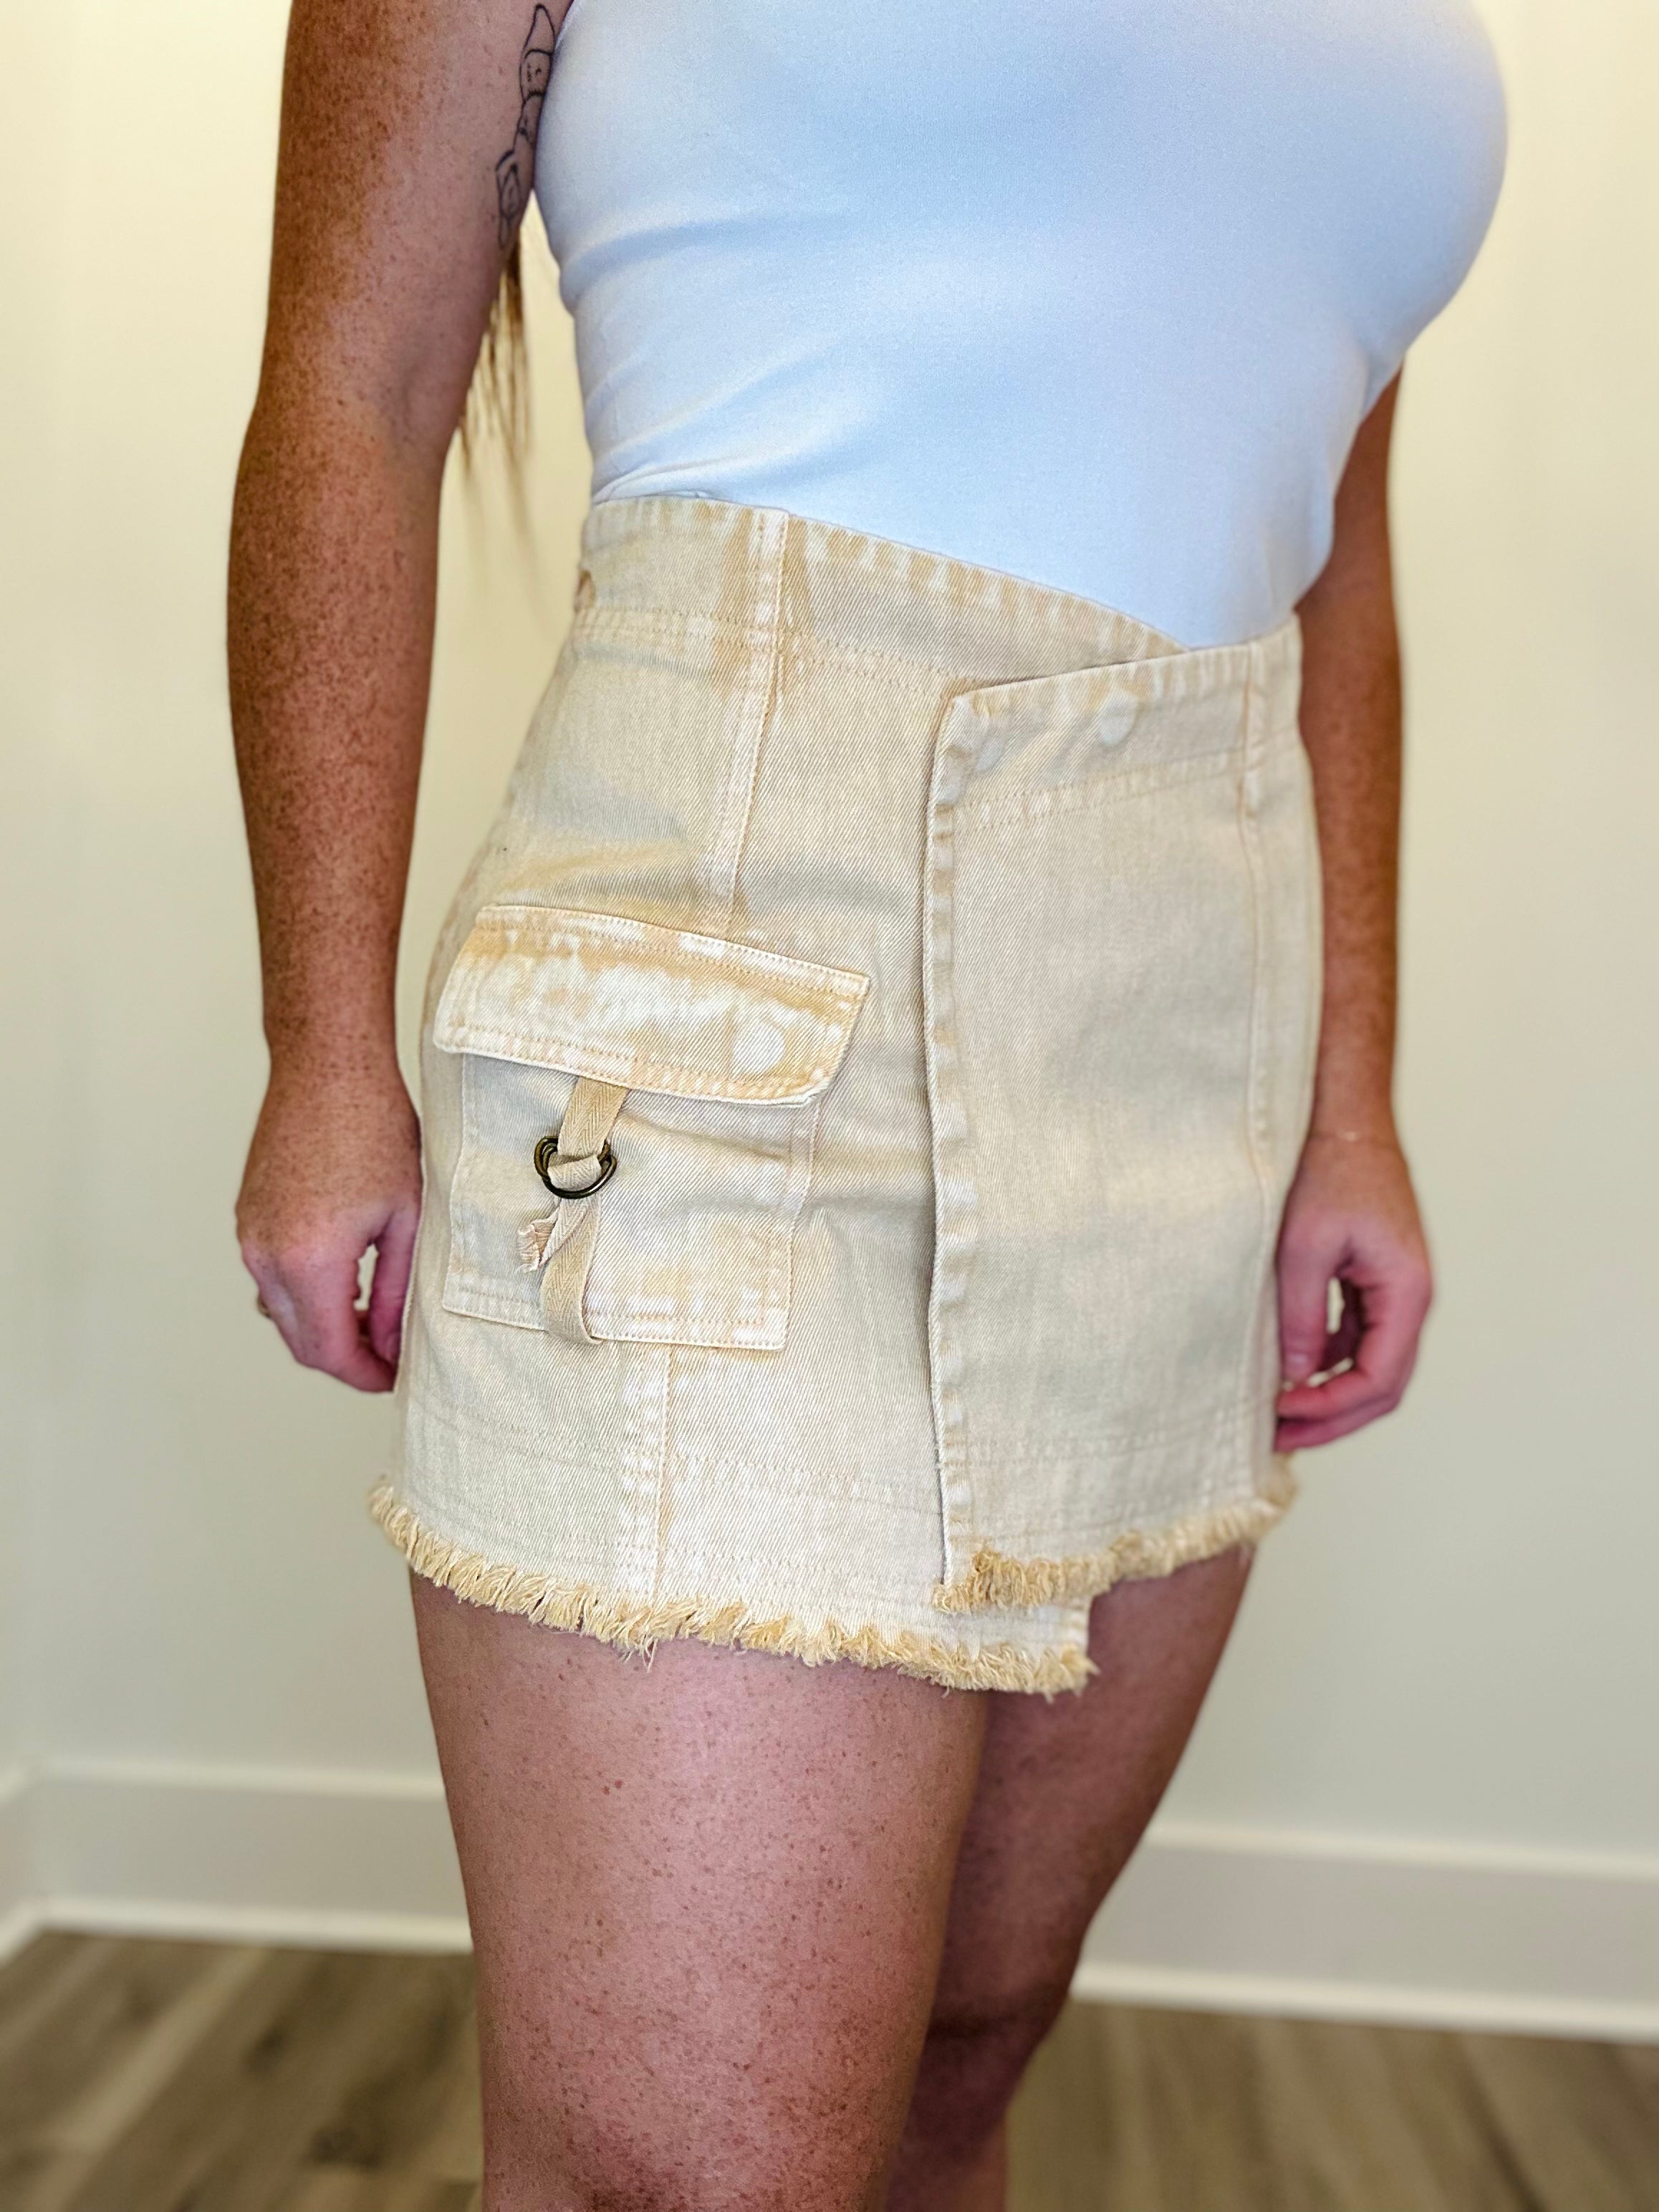 Be There Square Skort- Taupe West of Fifty Five